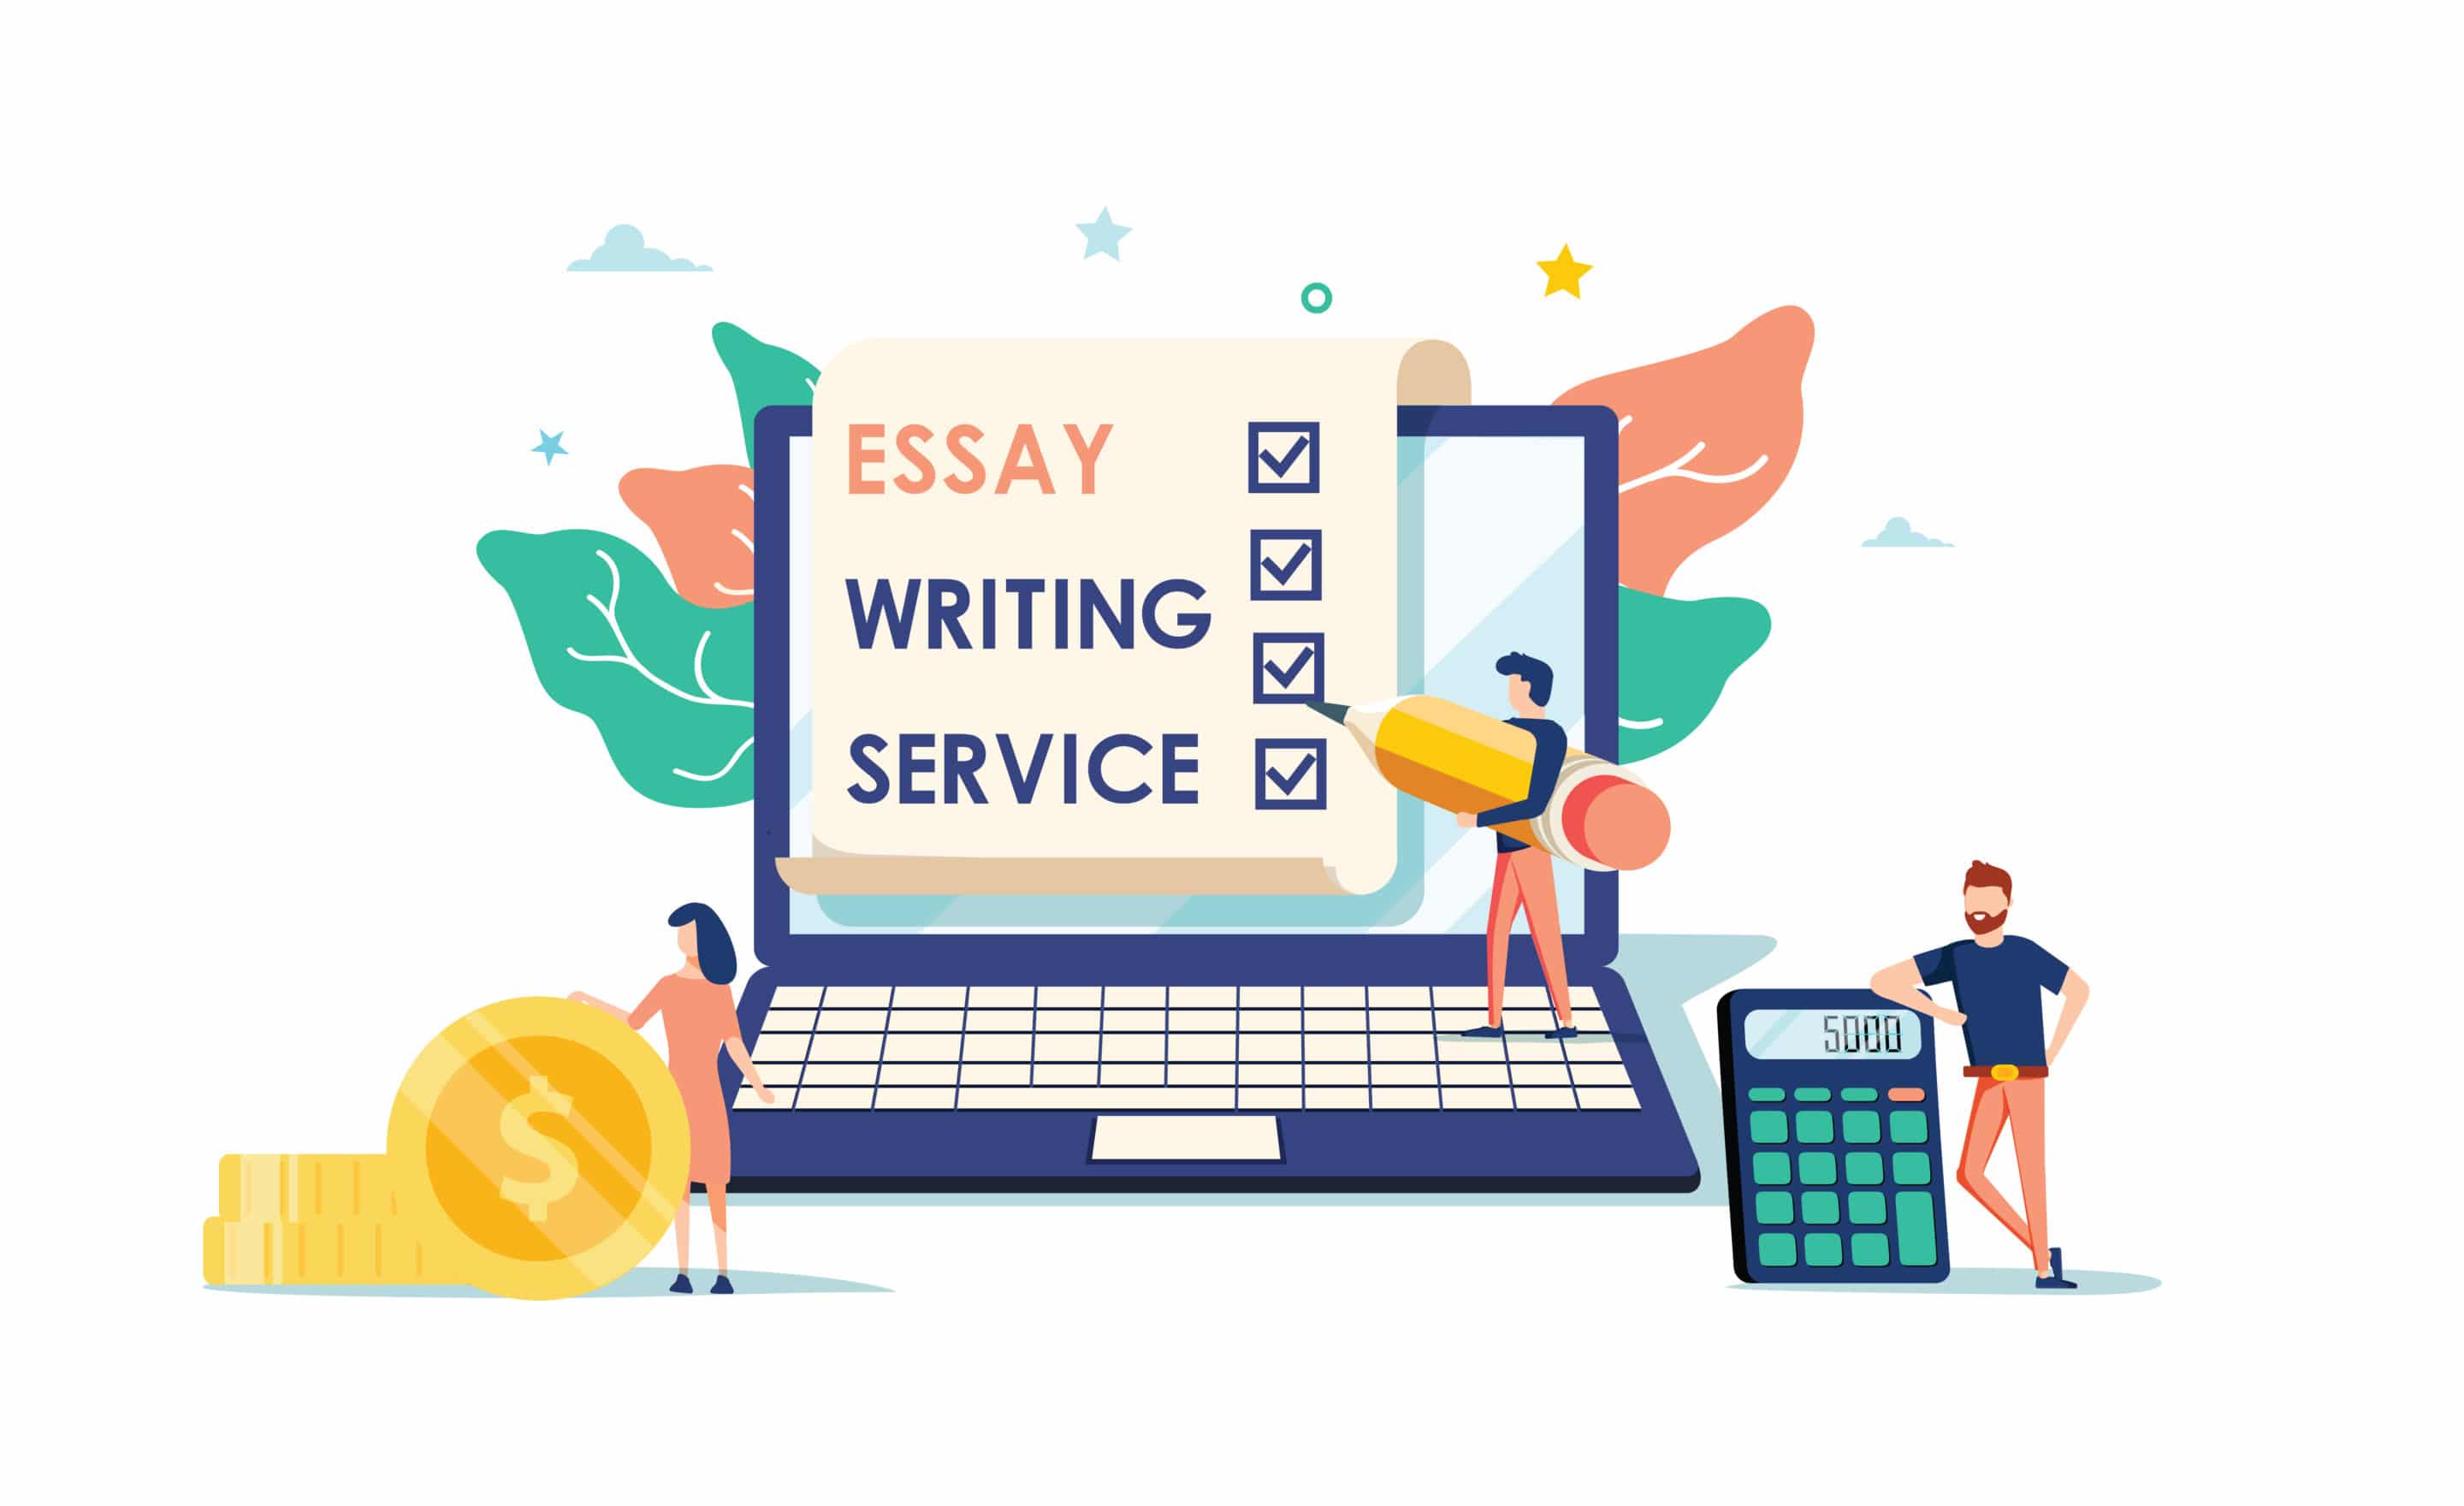 Hire Essay Writing Services: Top 11 Benefits for Students